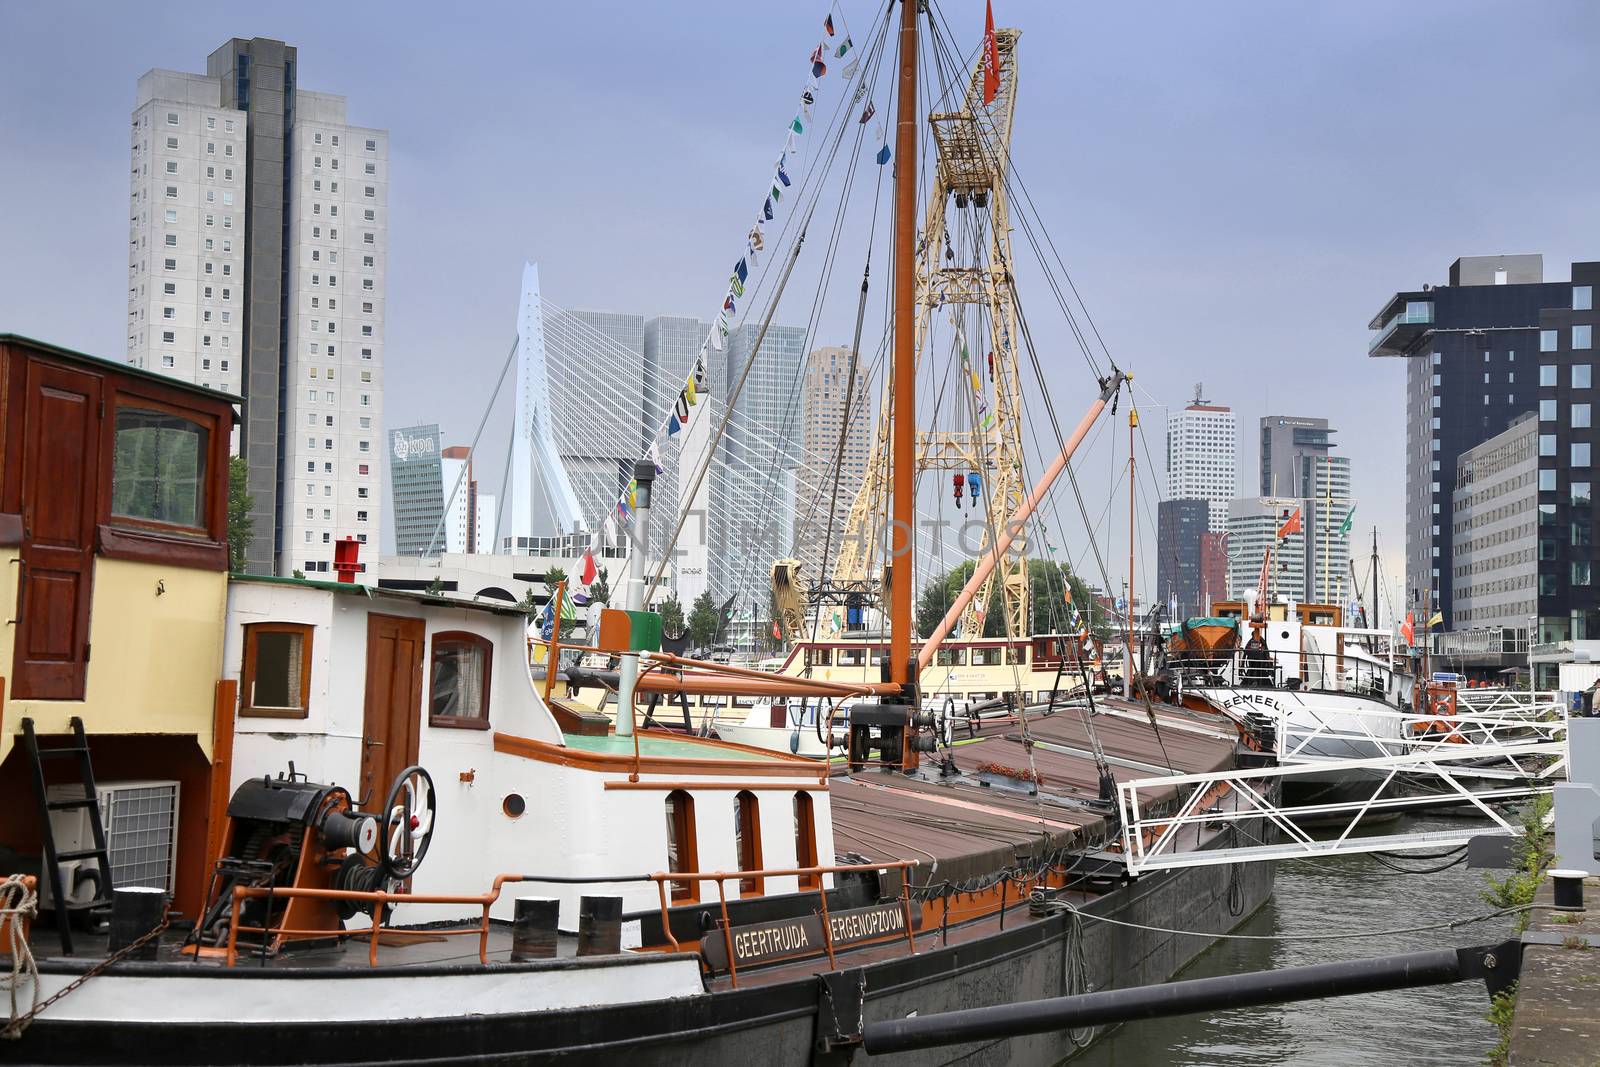 ROTTERDAM, THE NETHERLANDS - 18 AUGUST: Old cranes in Historical Leuvehaven, Rotterdam's oldest sea port. Harbor and modern apartment buildings in Rotterdam, Netherlands on August 18,2015.